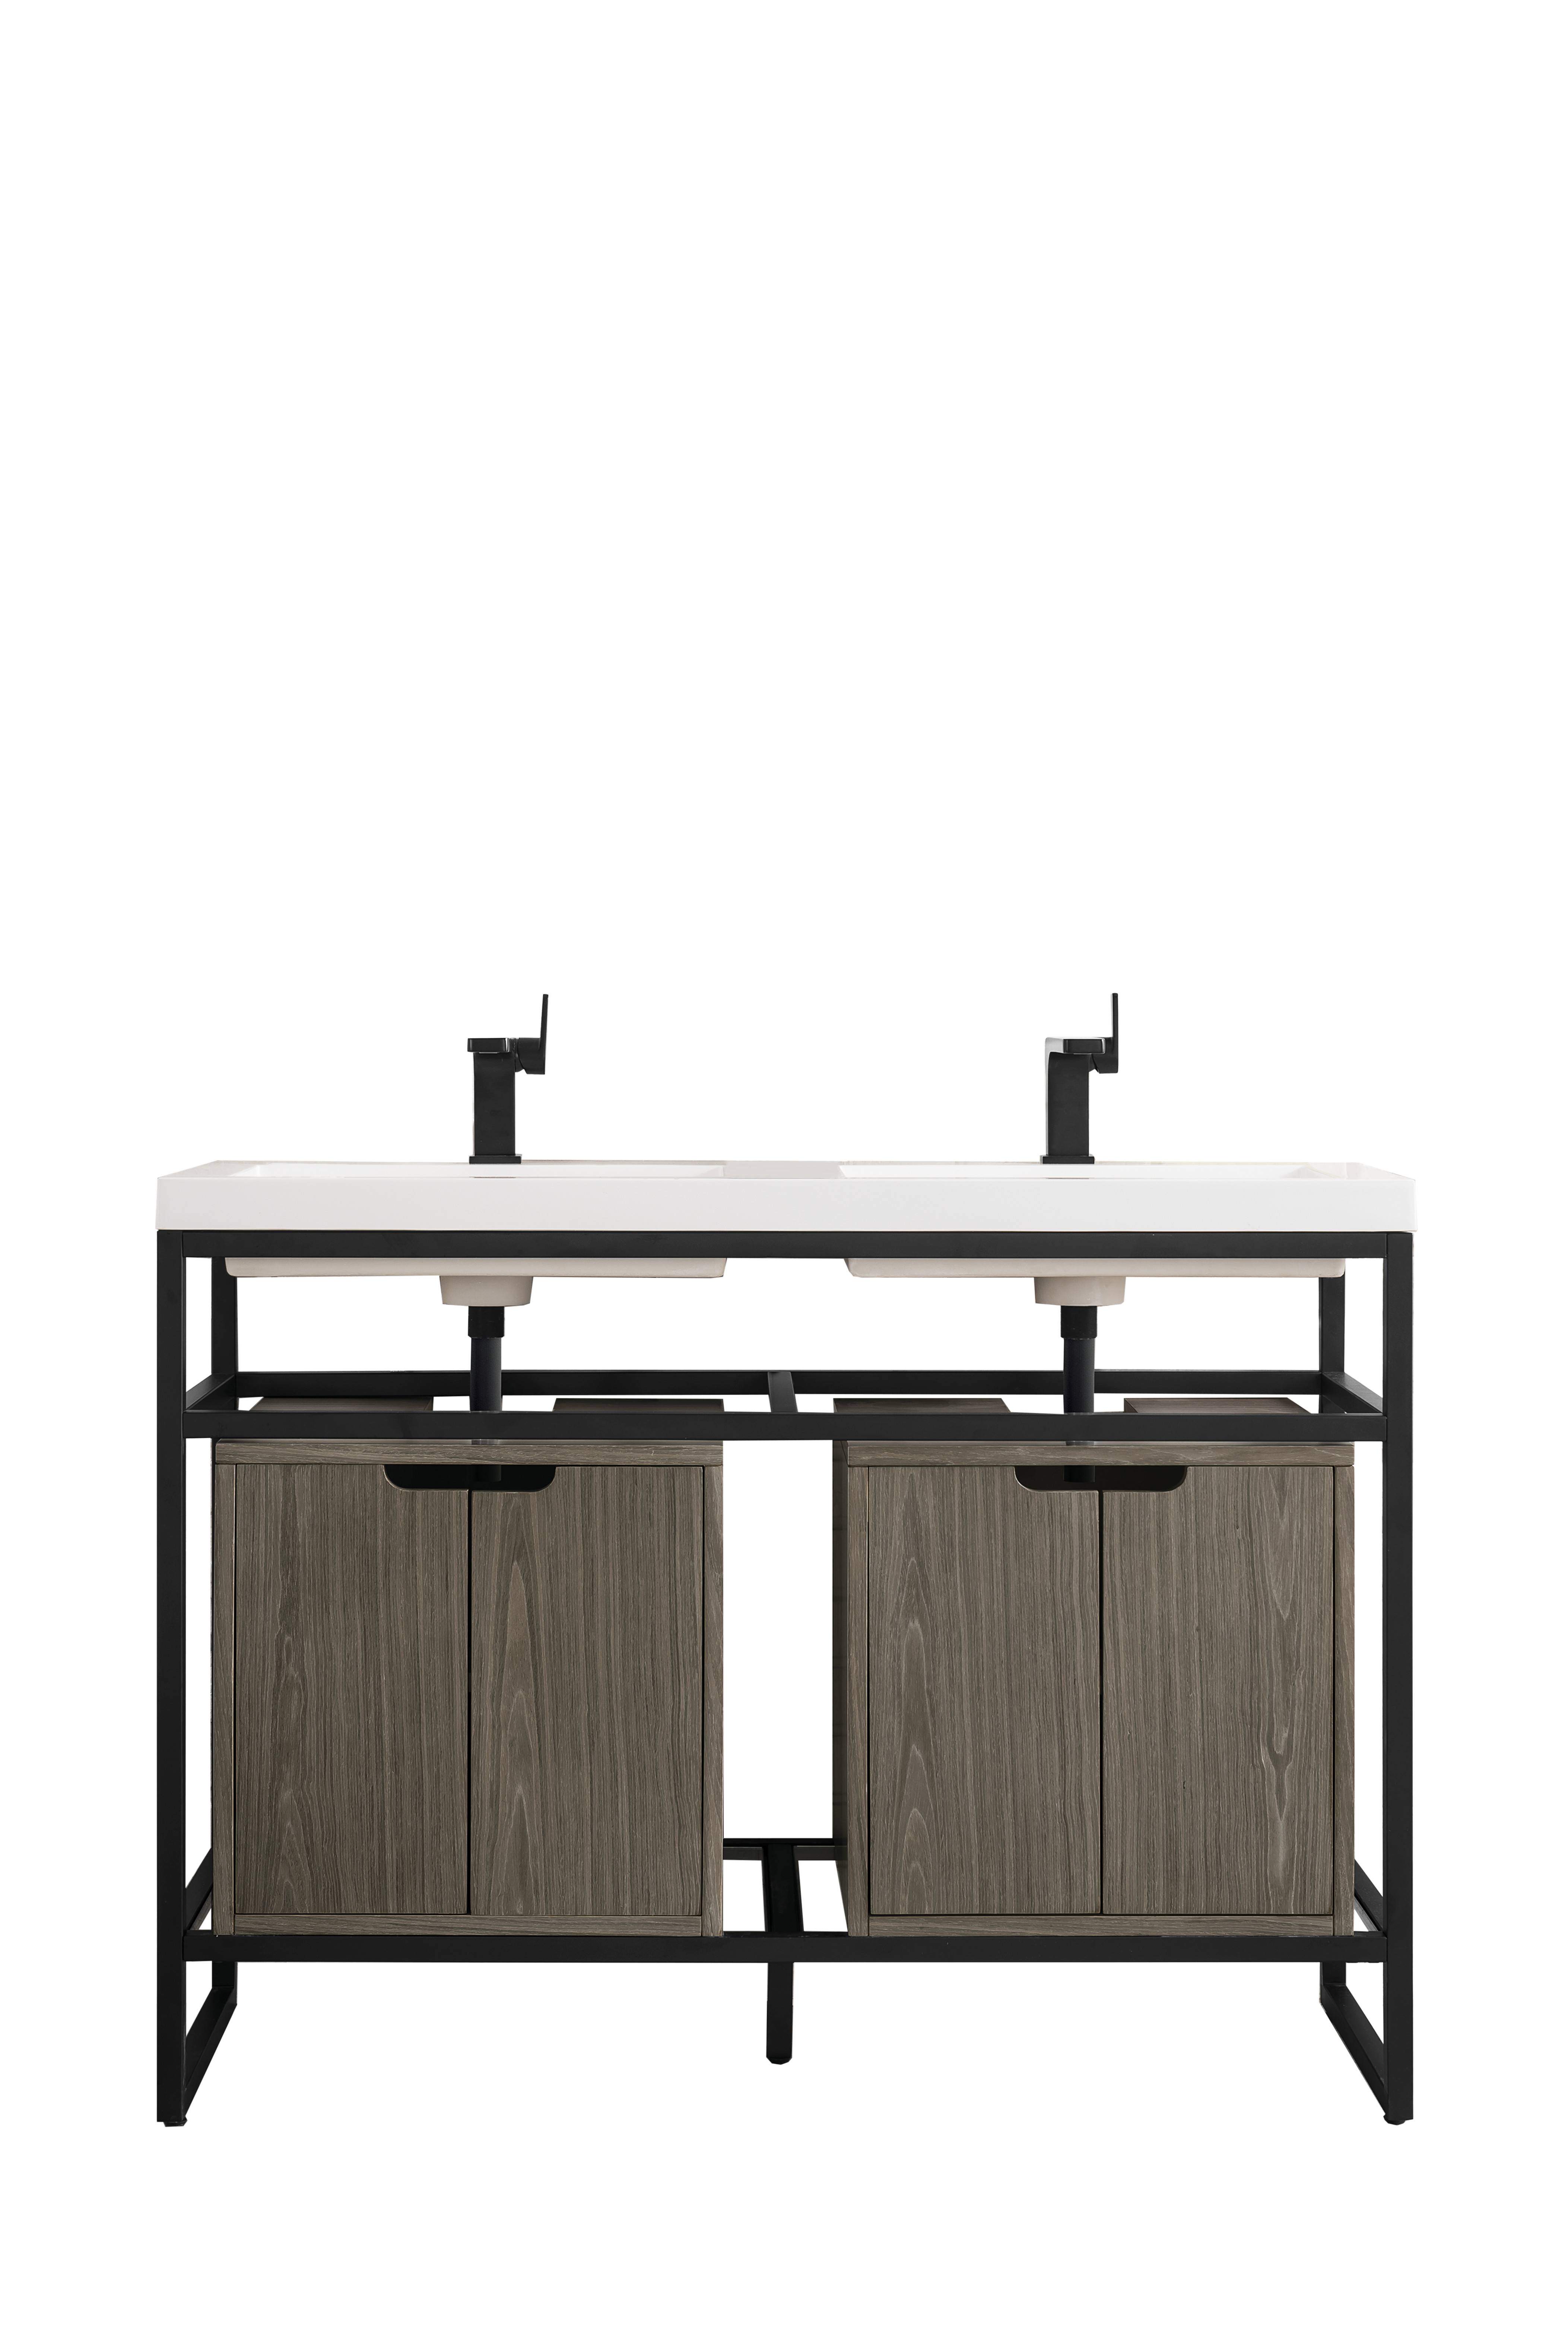 James Martin C105V47MBKSCAGRWG Boston 47" Stainless Steel Sink Console (Double Basins), Matte Black w/ Ash Gray Storage Cabinet, White Glossy Composite Countertop